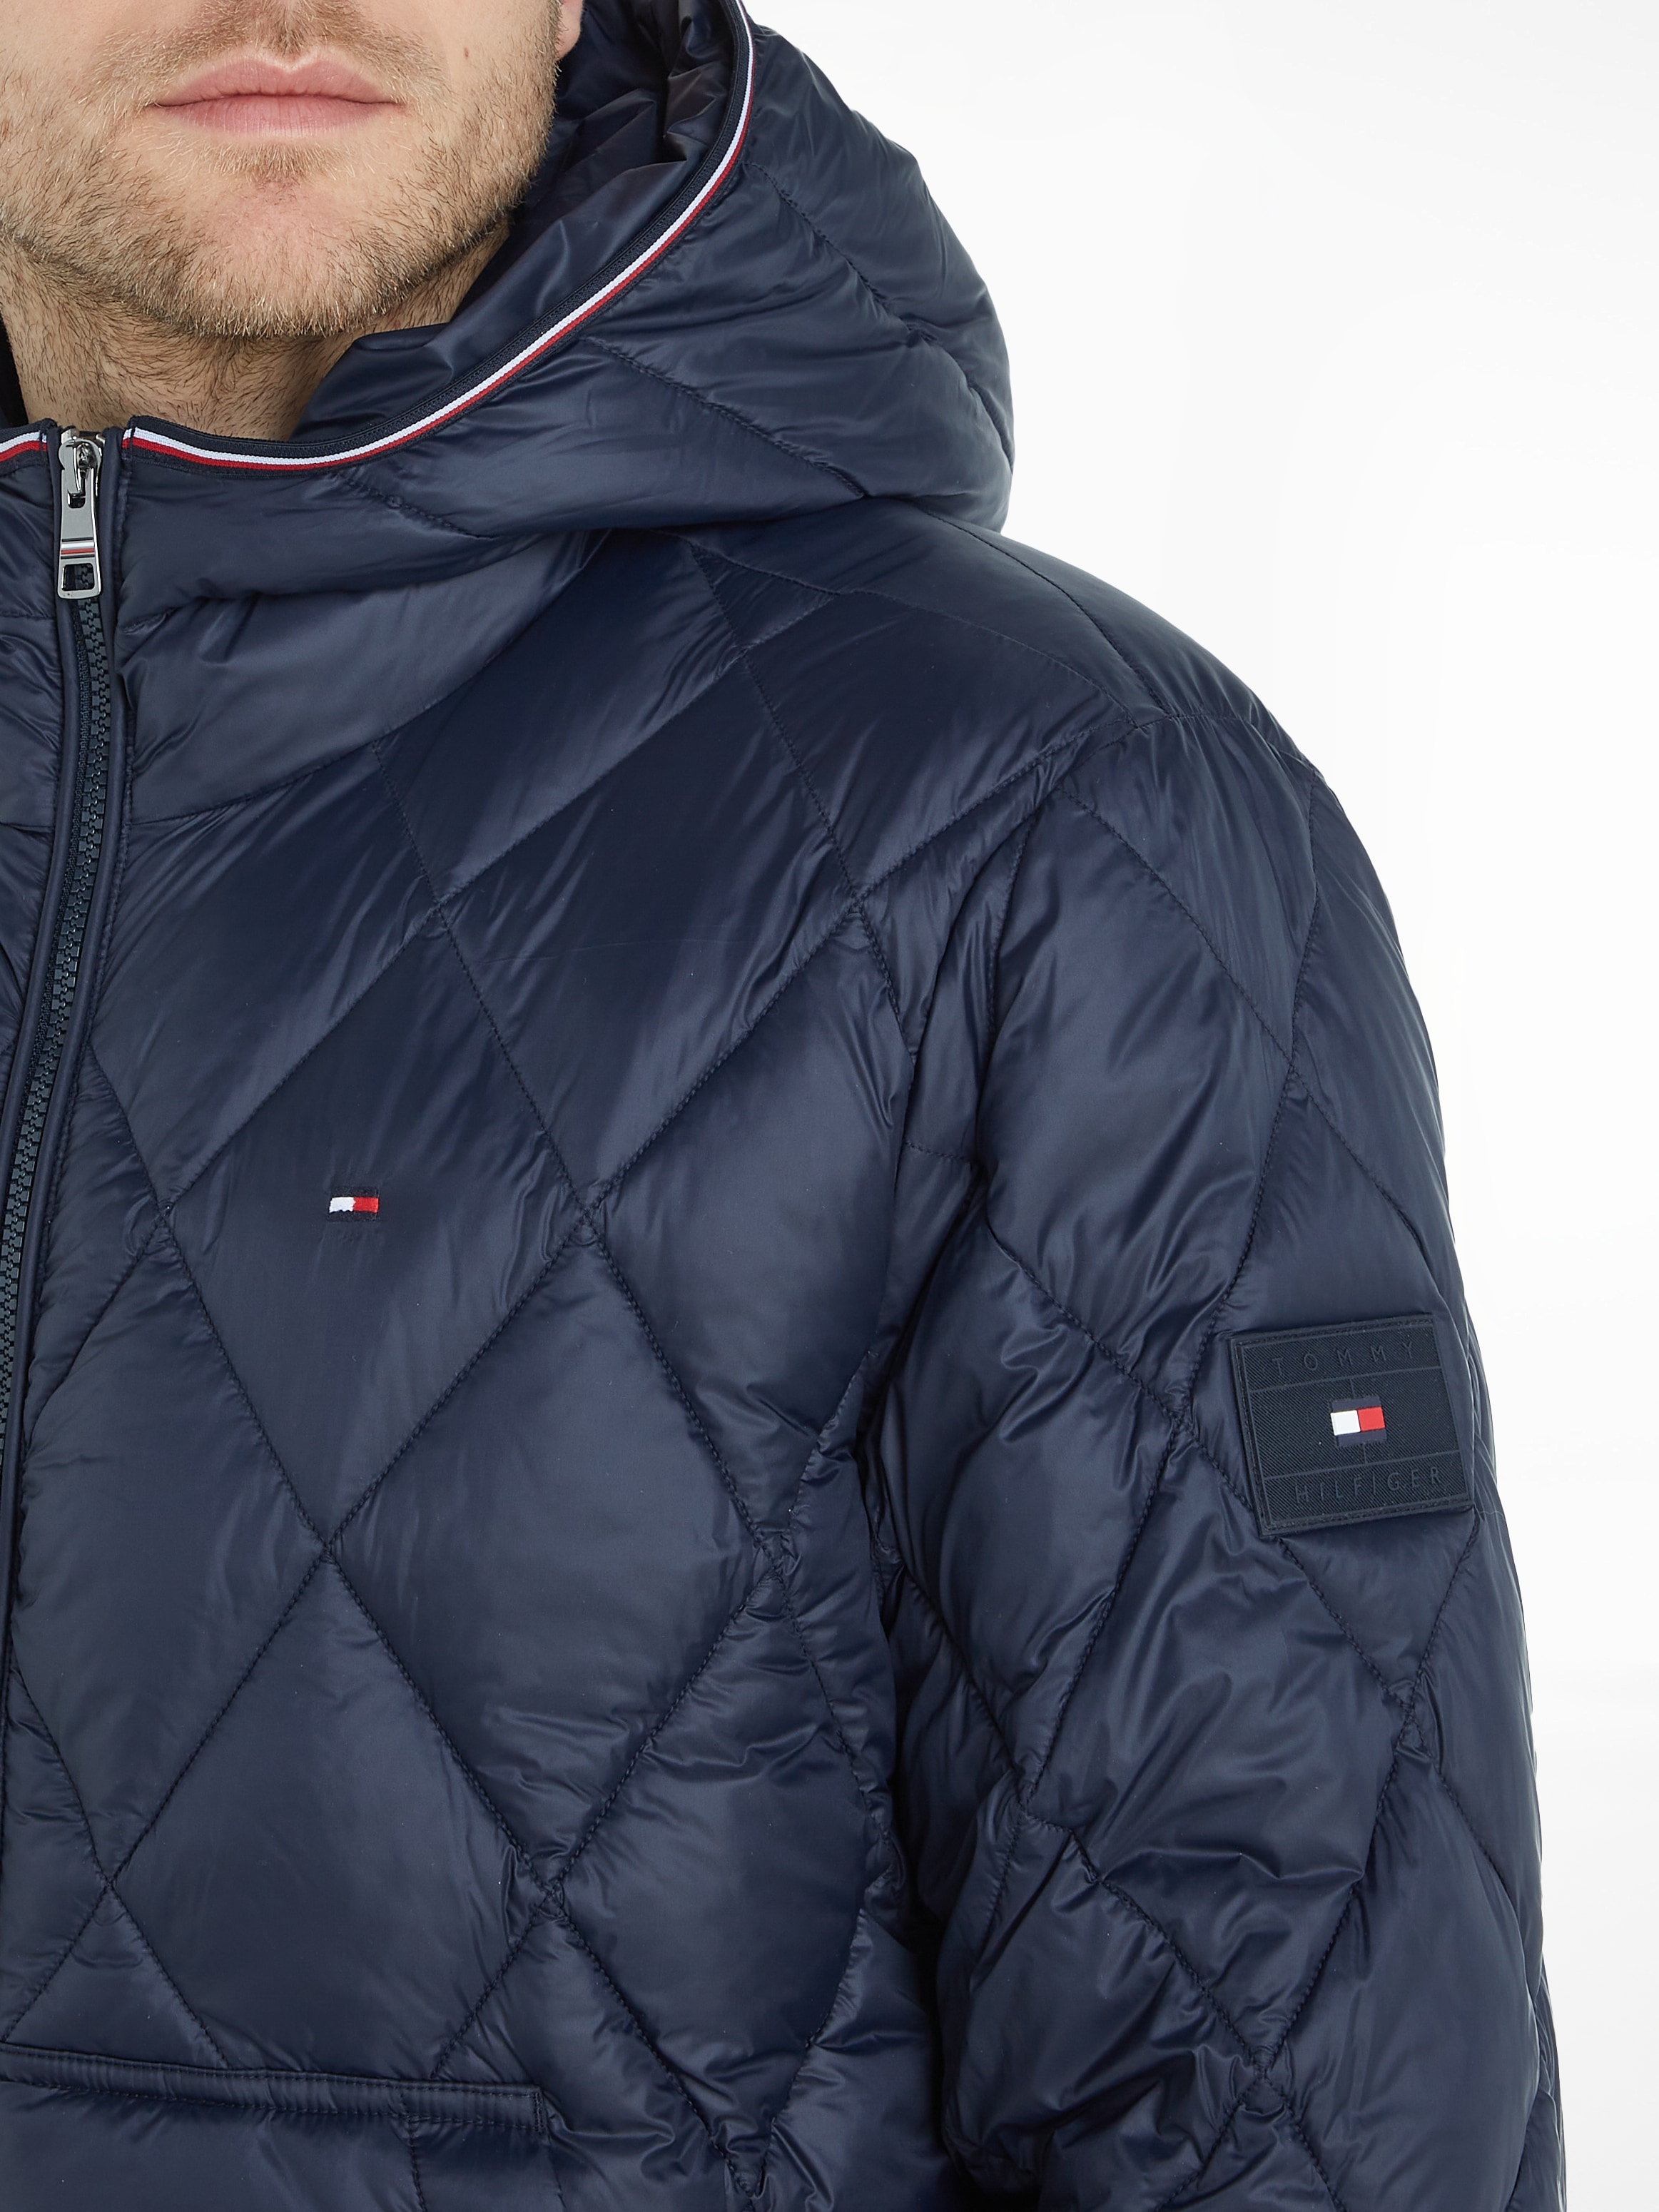 Tommy Hilfiger Steppjacke mit Kapuze ♕ »MIX QUILT bei RECYCLED«